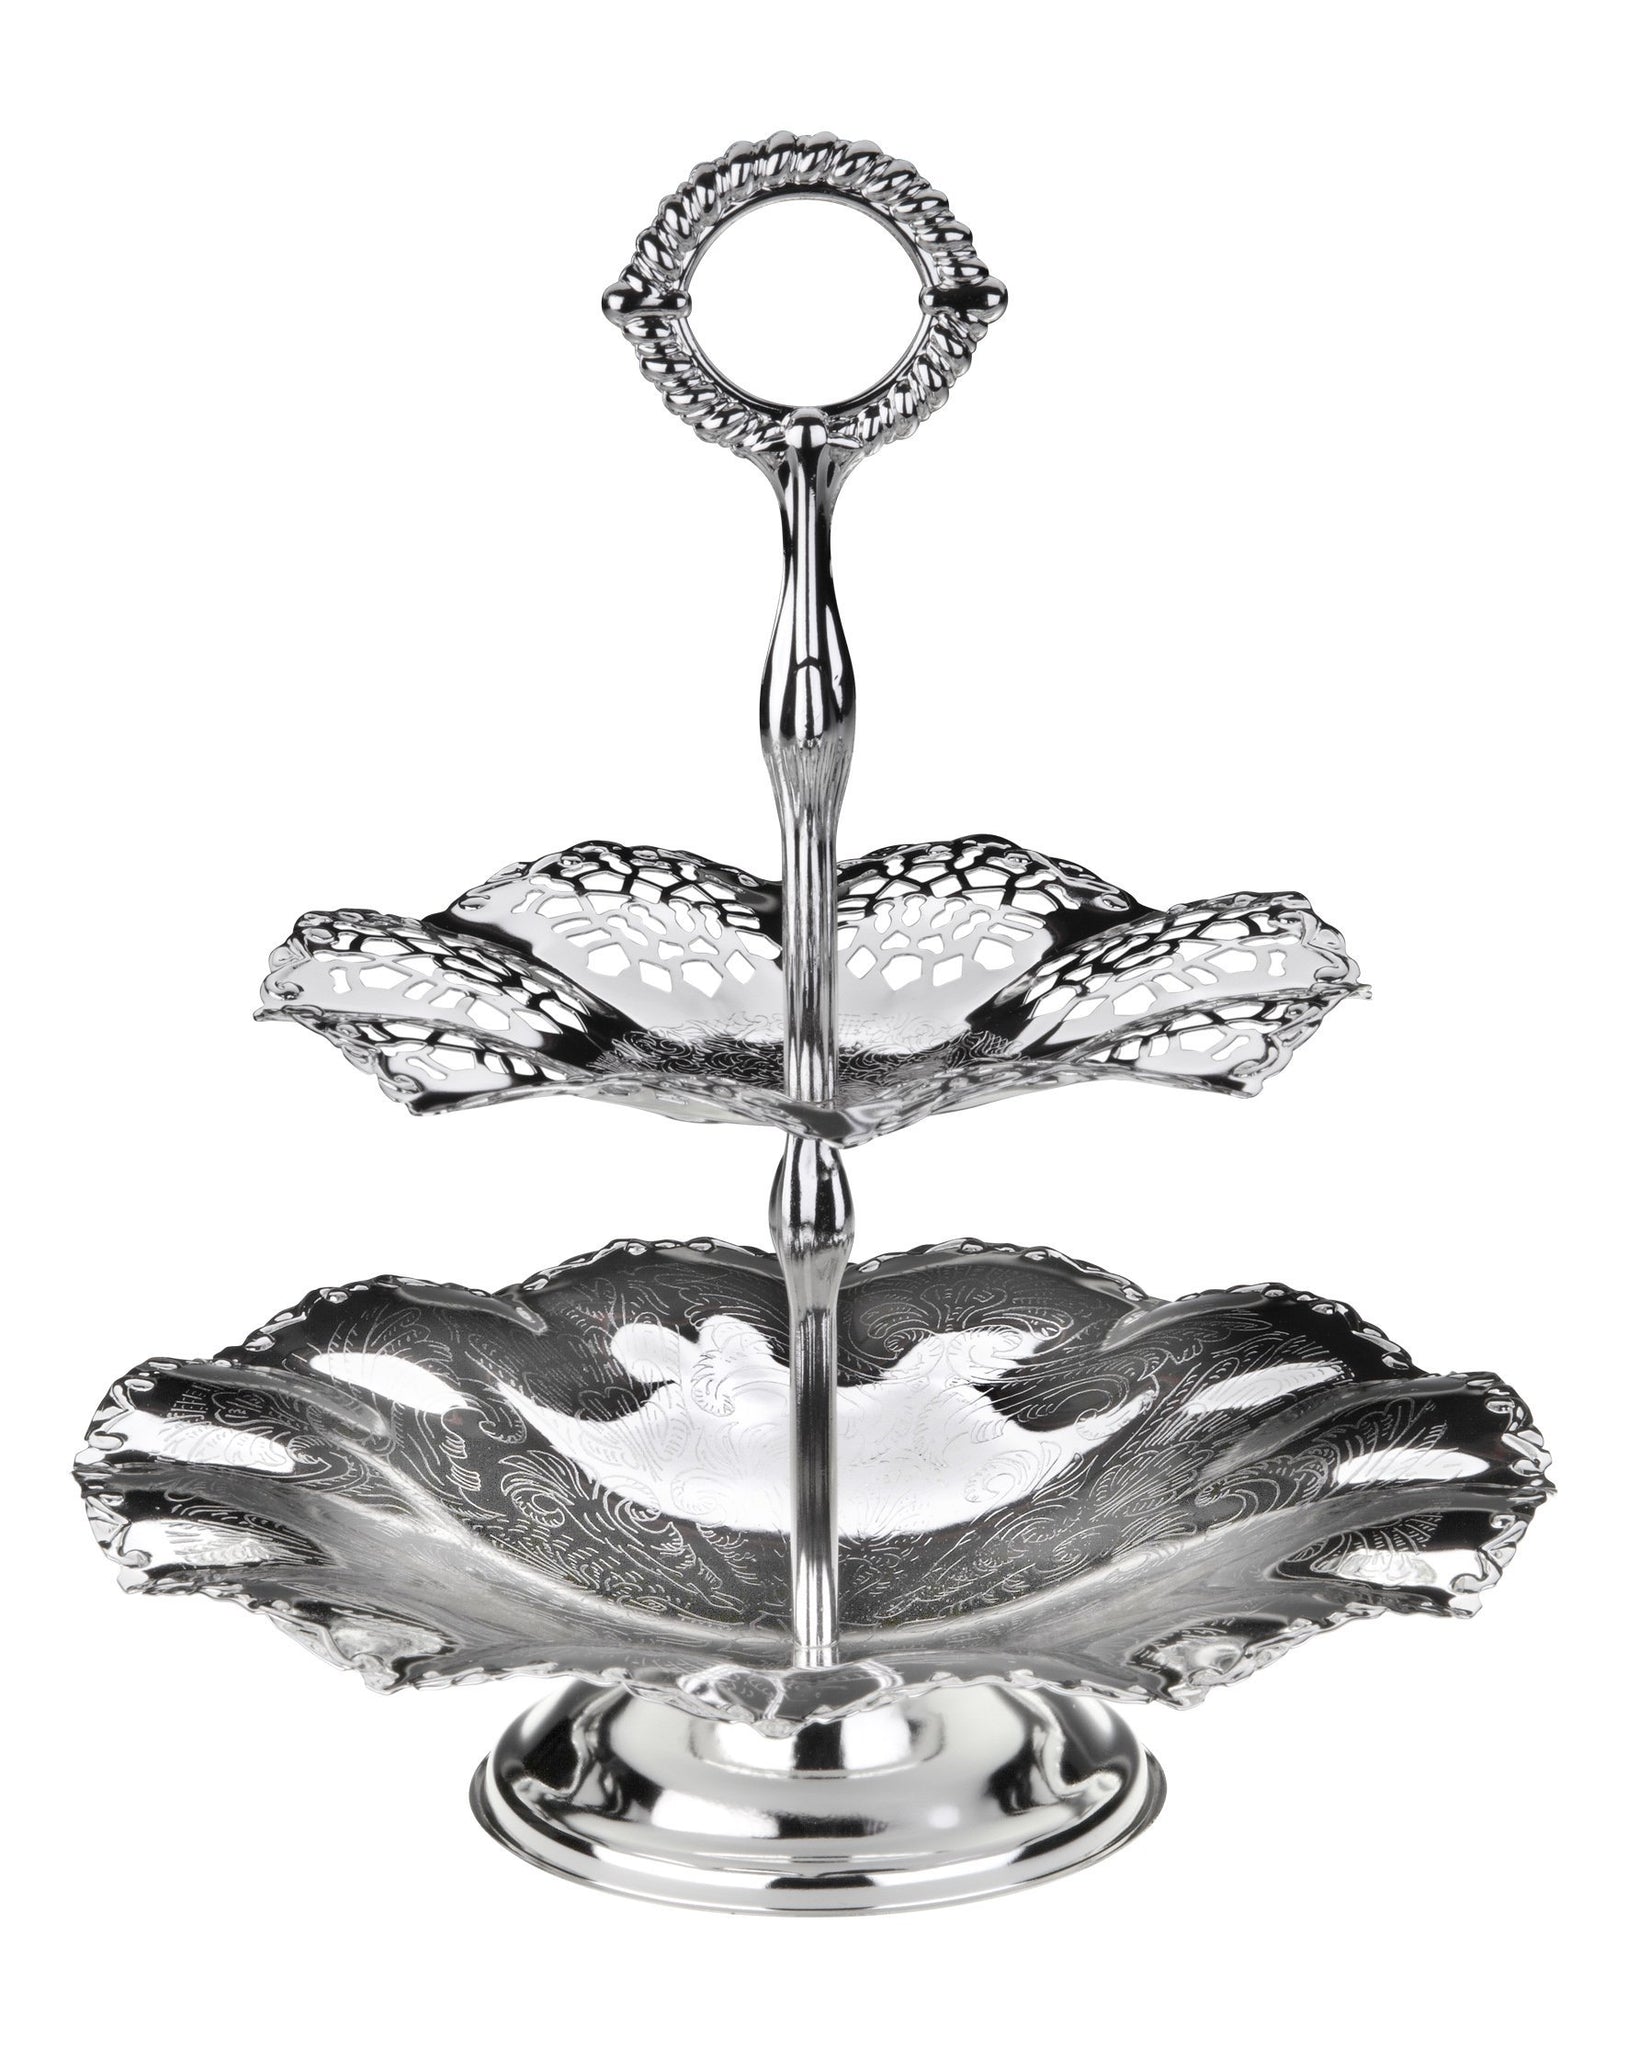 Queen Anne - 2 Tier Wavy Edge Cake Stand - Silver Plated Metal - 27 & 23 cm - 26000254